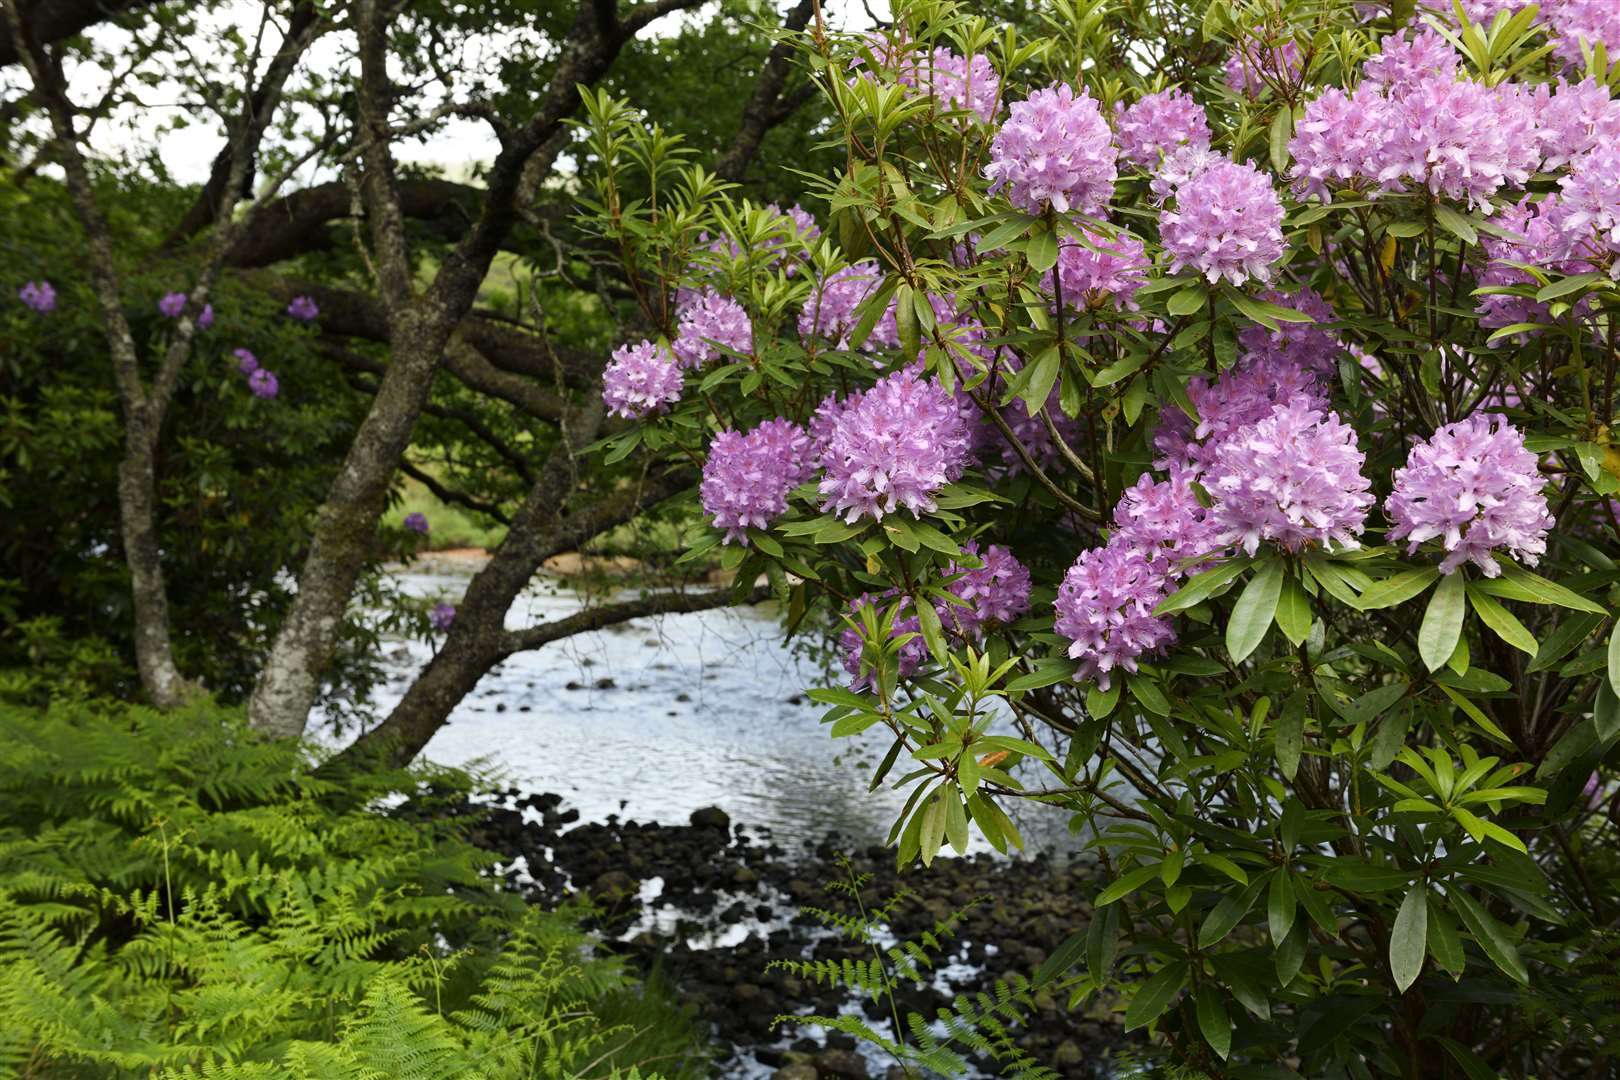 It may look pretty, but Rhododendron ponticum is Scotland's most dangerous non-native invasive species and unchecked can destroy ecosystems.